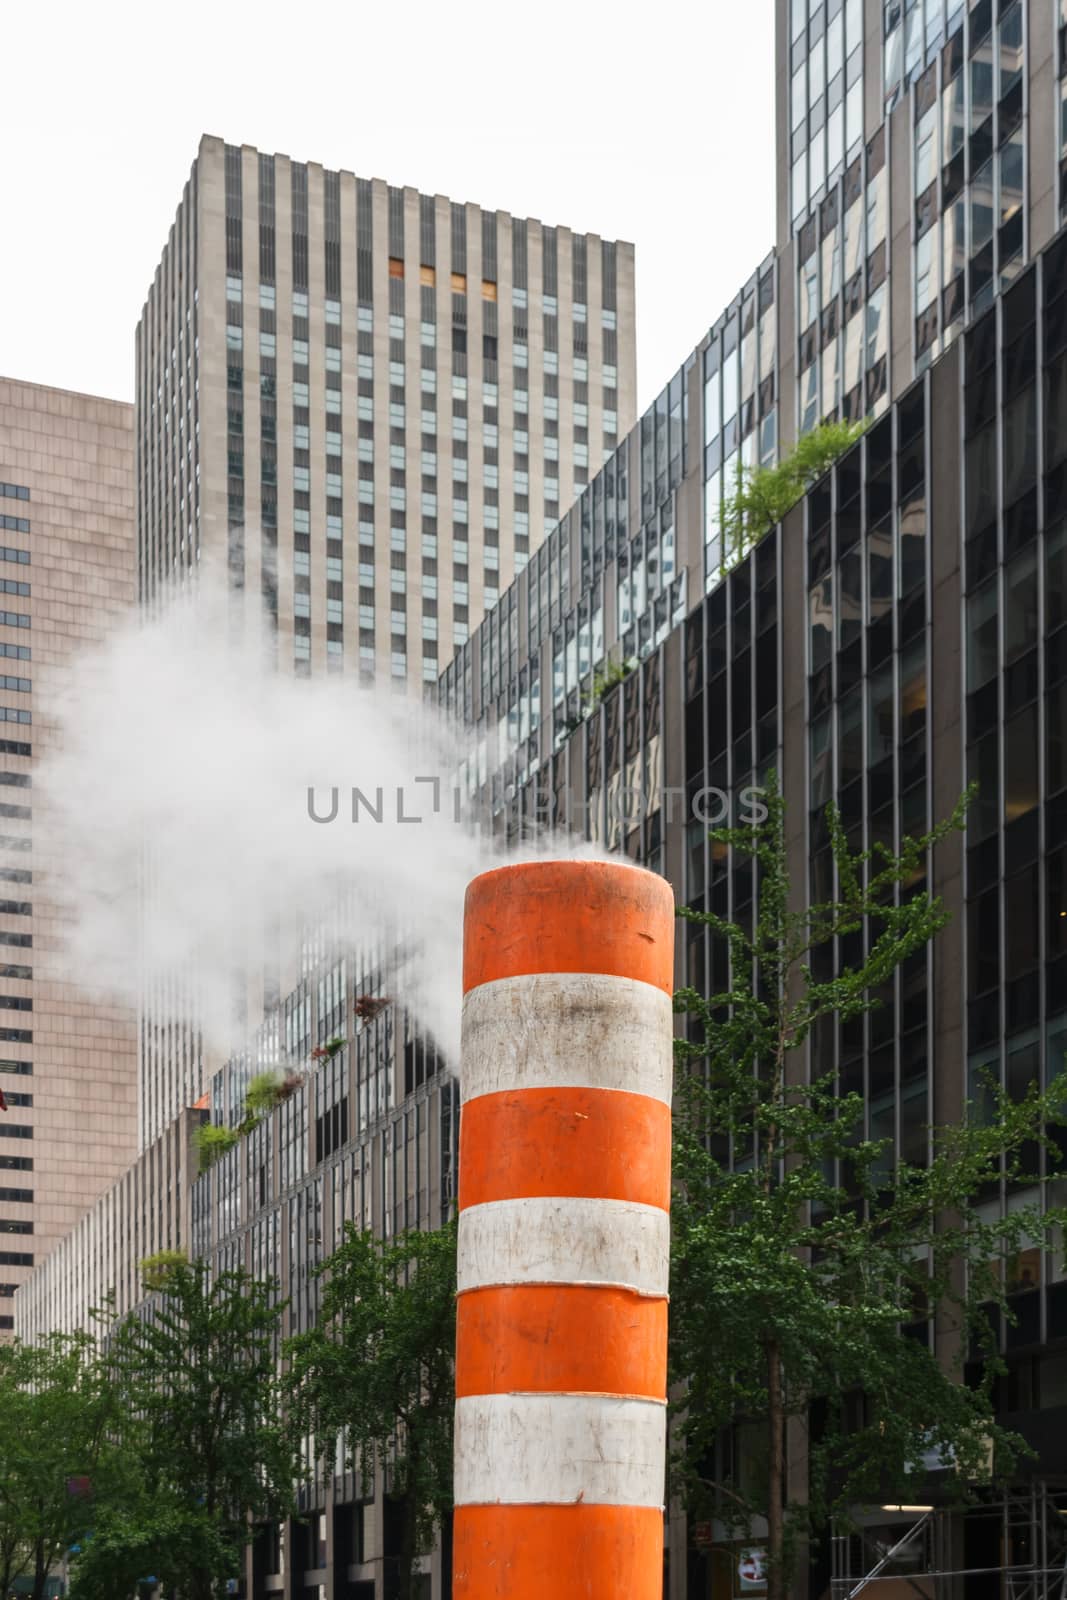 Steam rising out of a subway vent in a street of New York City